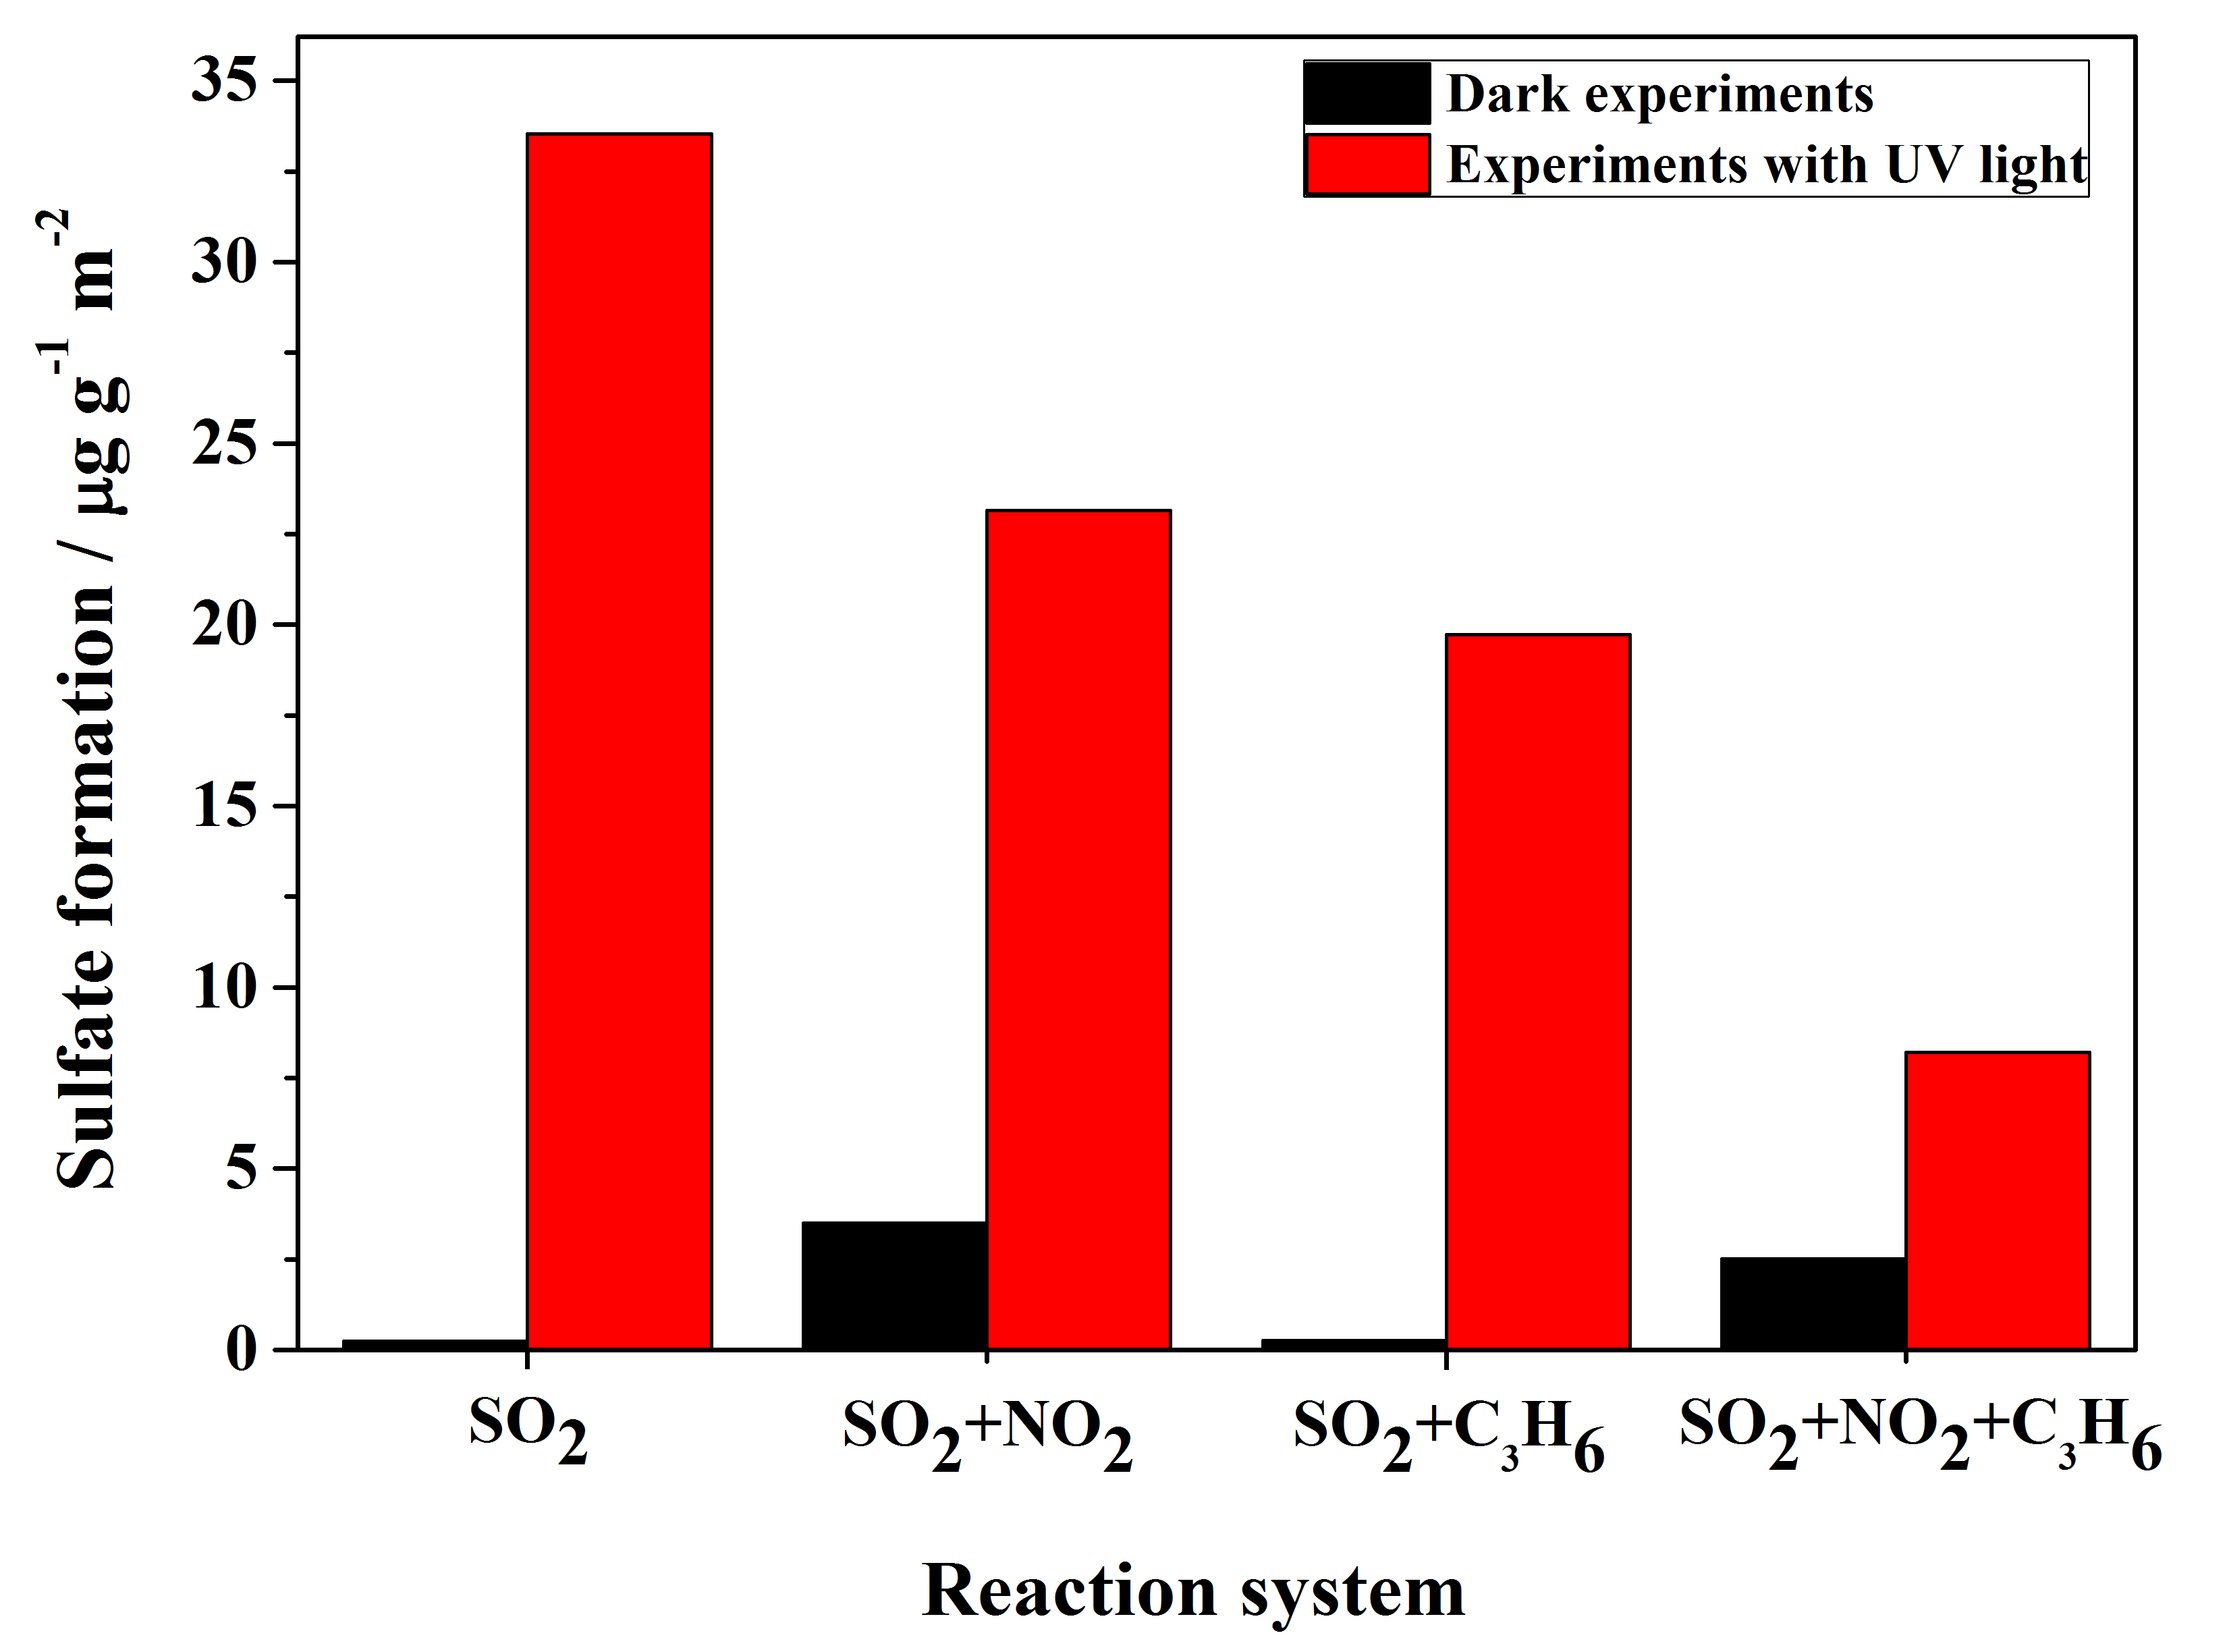 ACP - Effects of NO2 and C3H6 on the heterogeneous oxidation of 